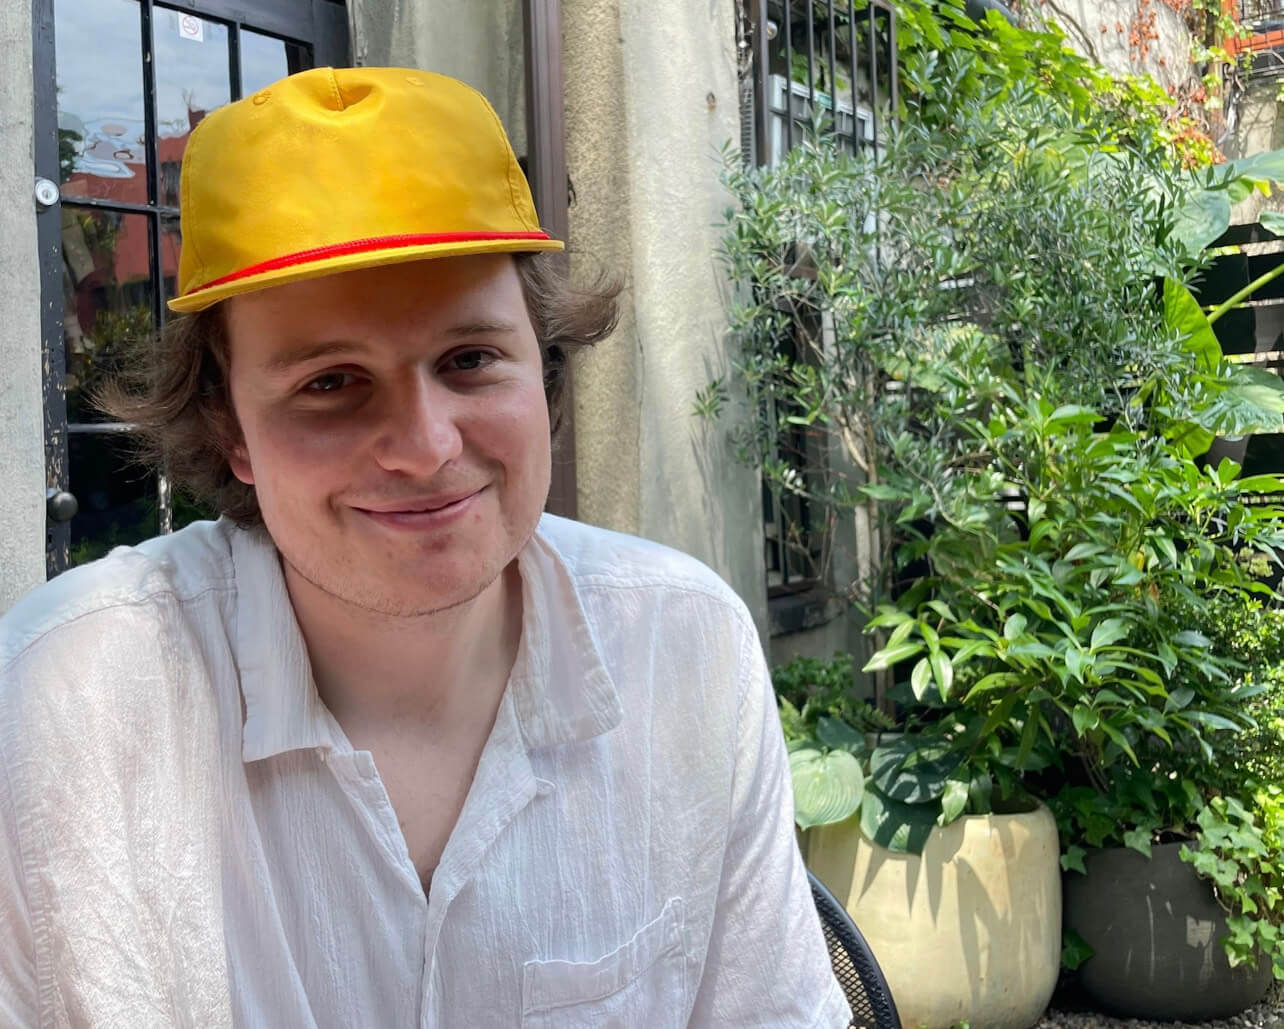 henry sitting outside in yellow hat in front of greenery